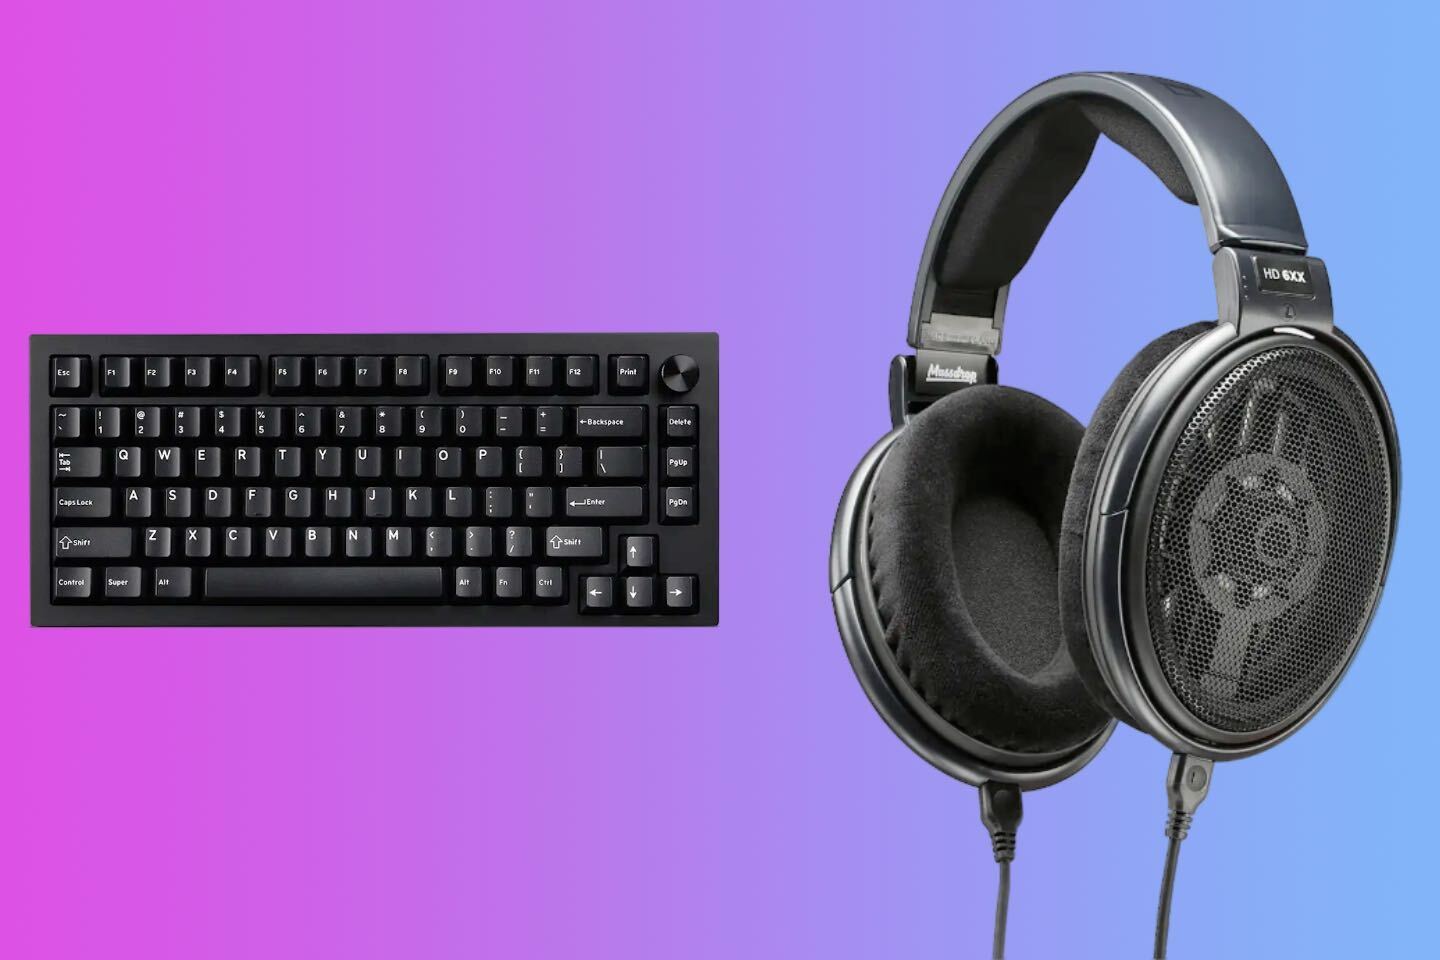 Don’t miss Drop’s decadent offers on headphones and keyboards